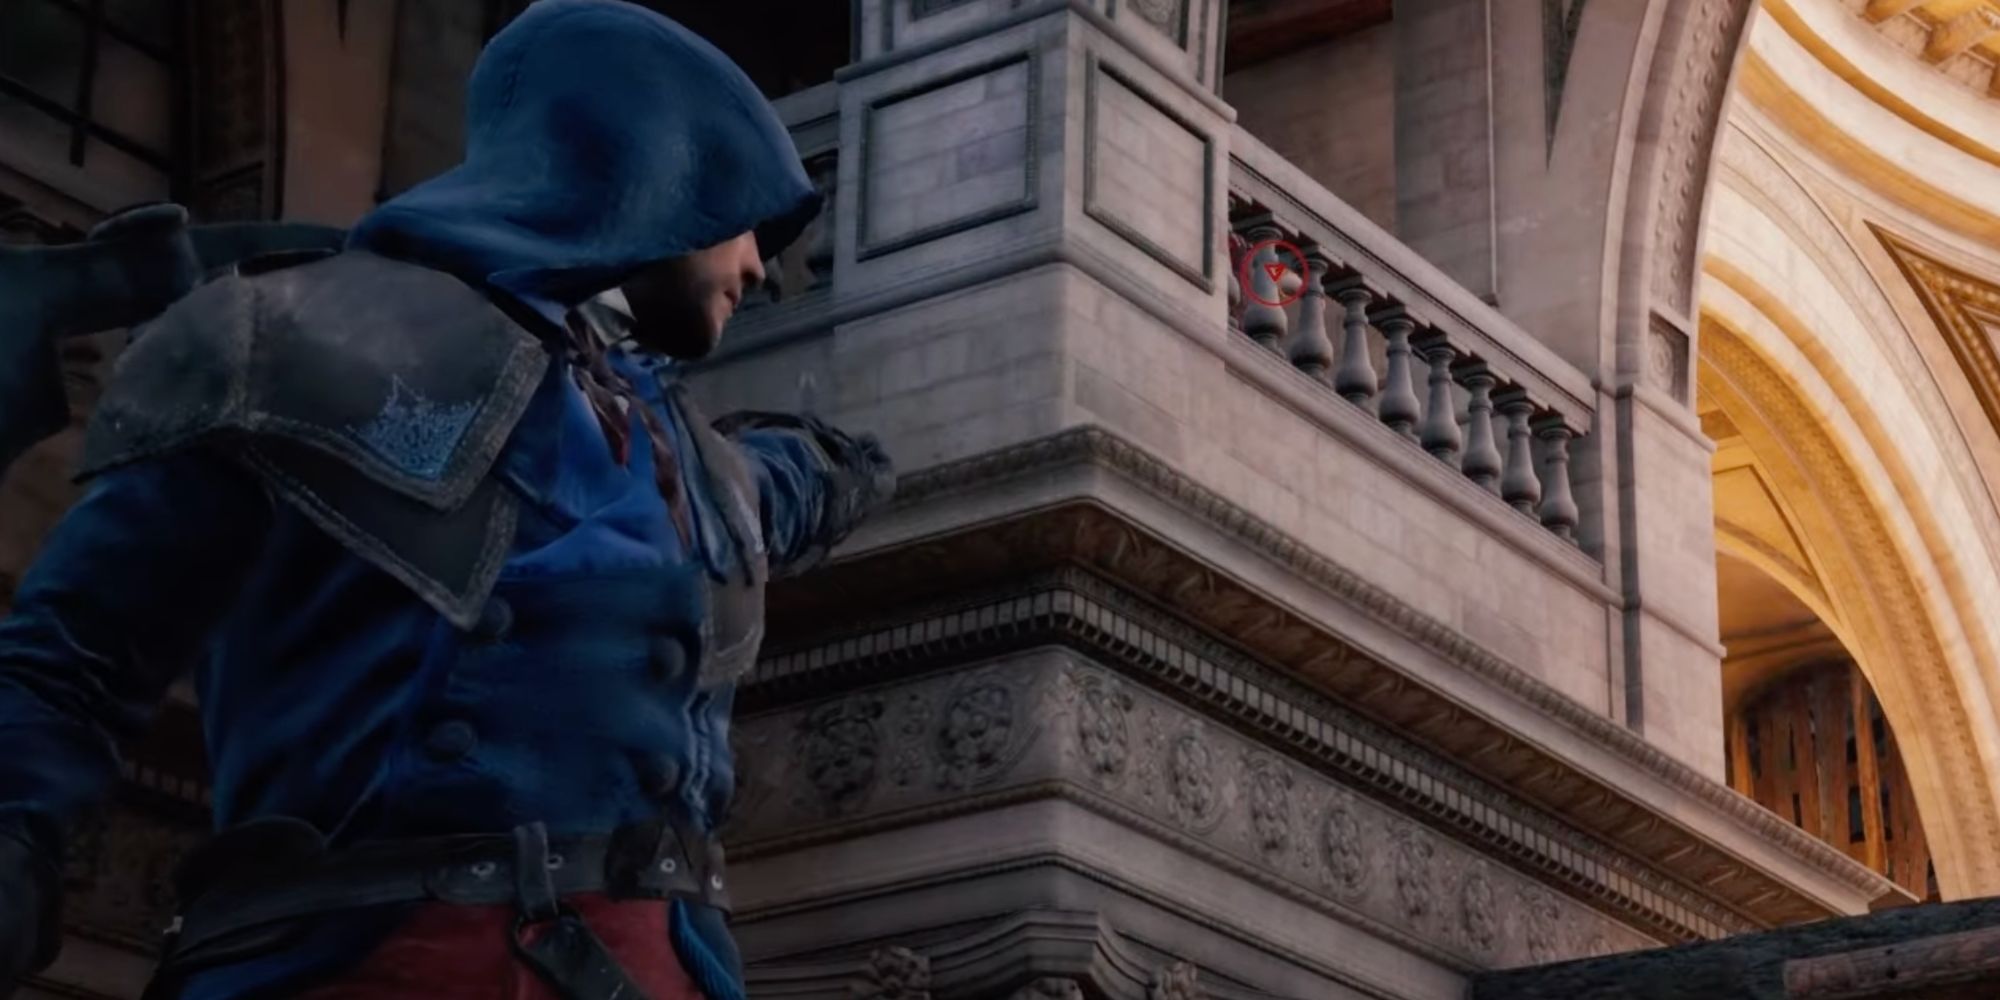 Arno Dorian Targeting An Enemy in Assassin's Creed Unity